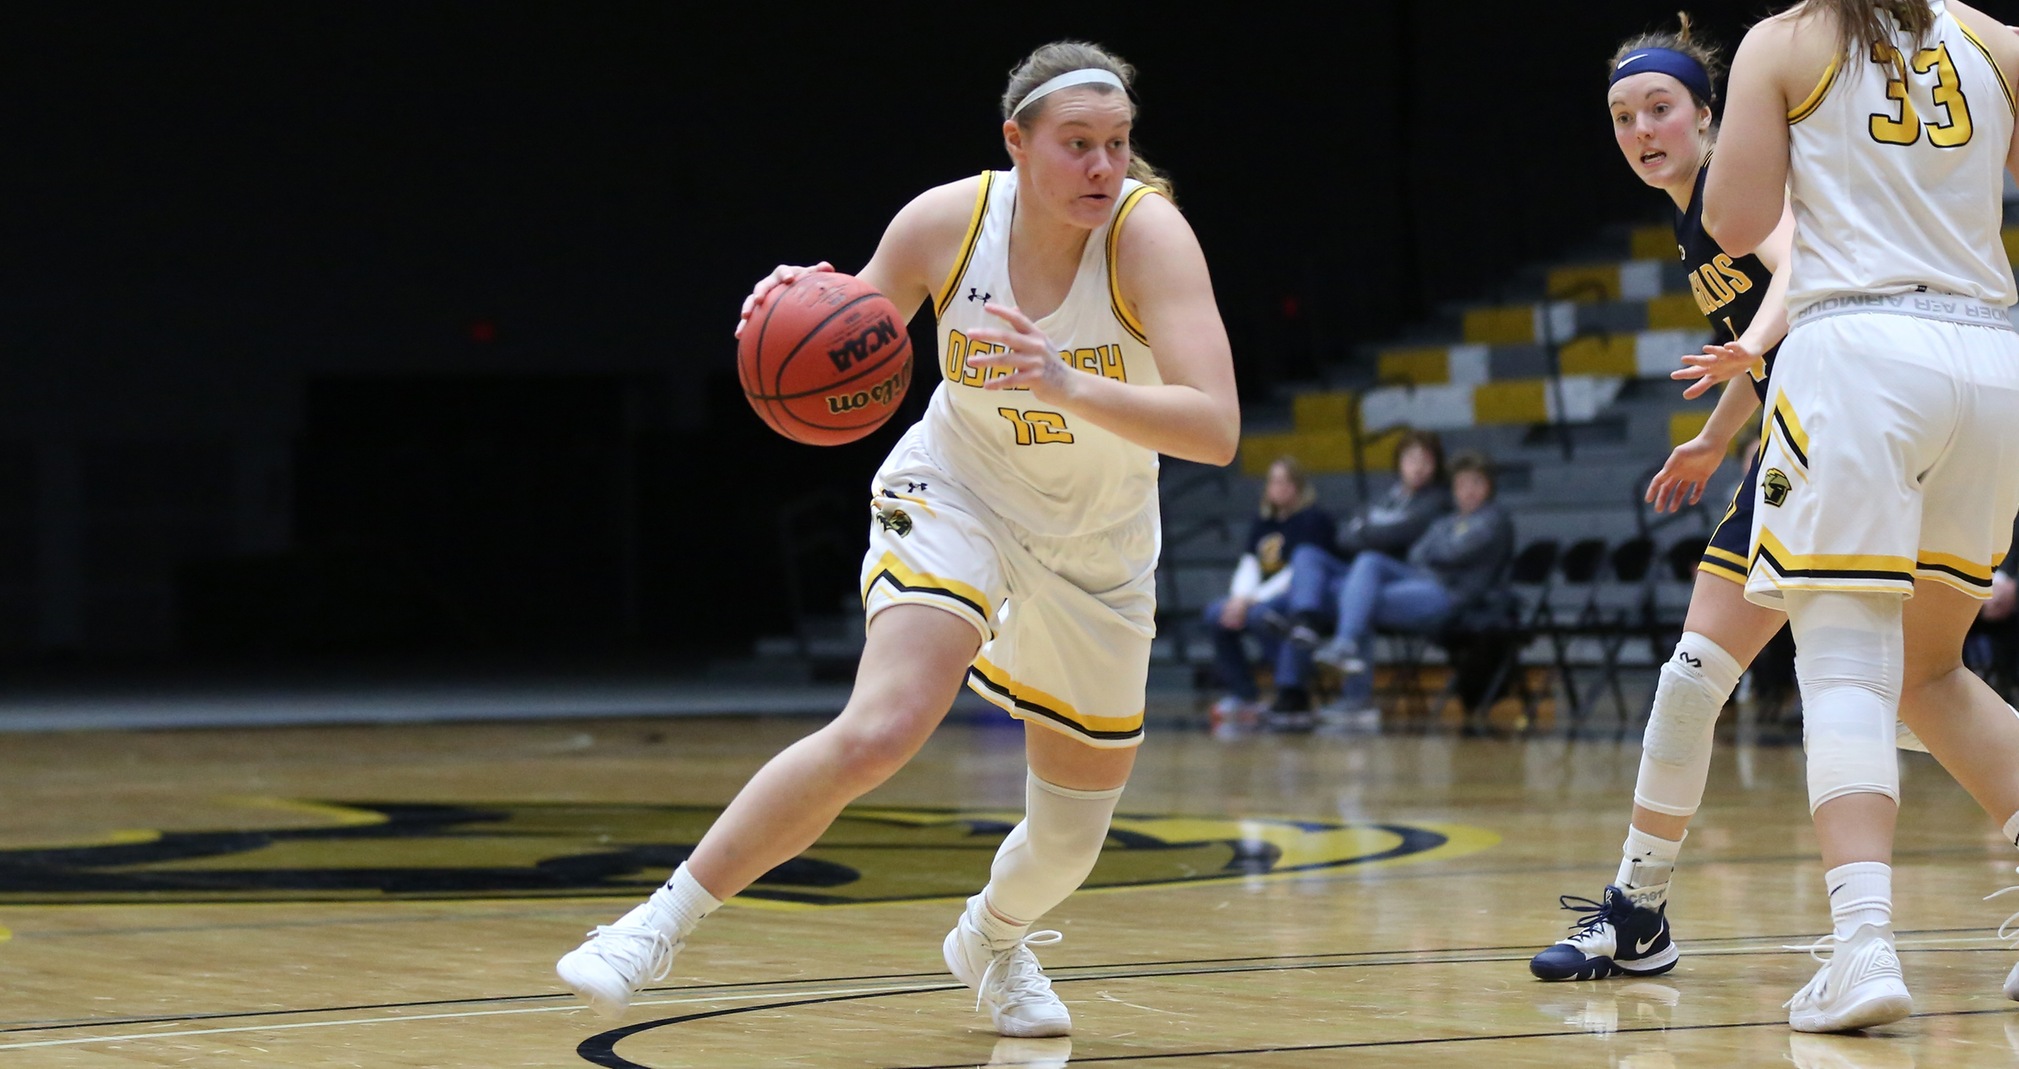 Leah Porath tallied 16 points against the Falcons for her 20th consecutive double-digit scoring performance.